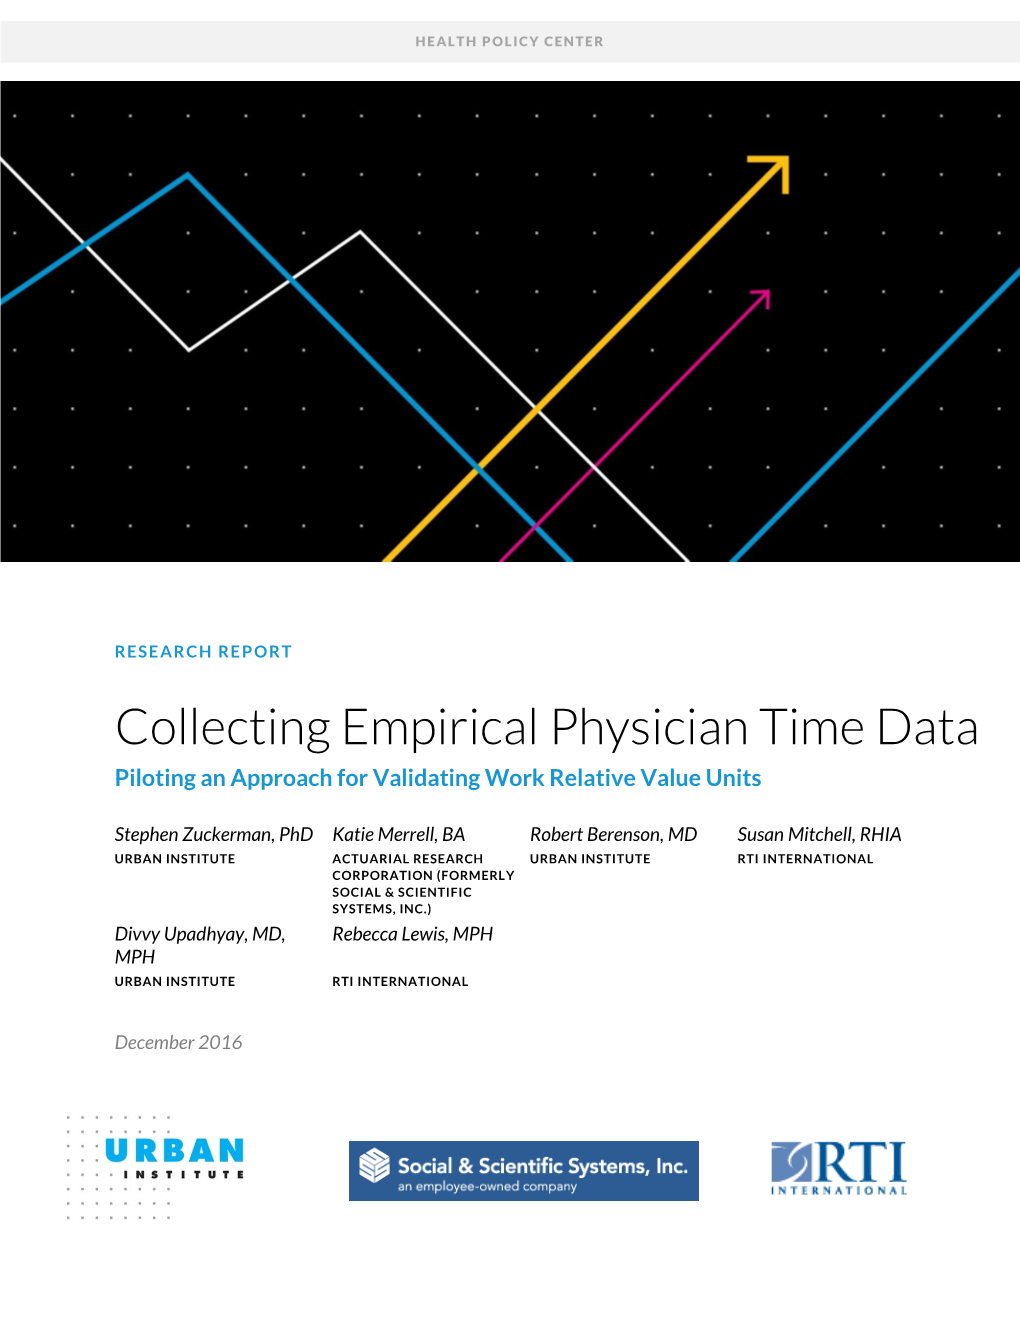 Collecting Empirical Physician Time Data Piloting an Approach for Validating Work Relative Value Units